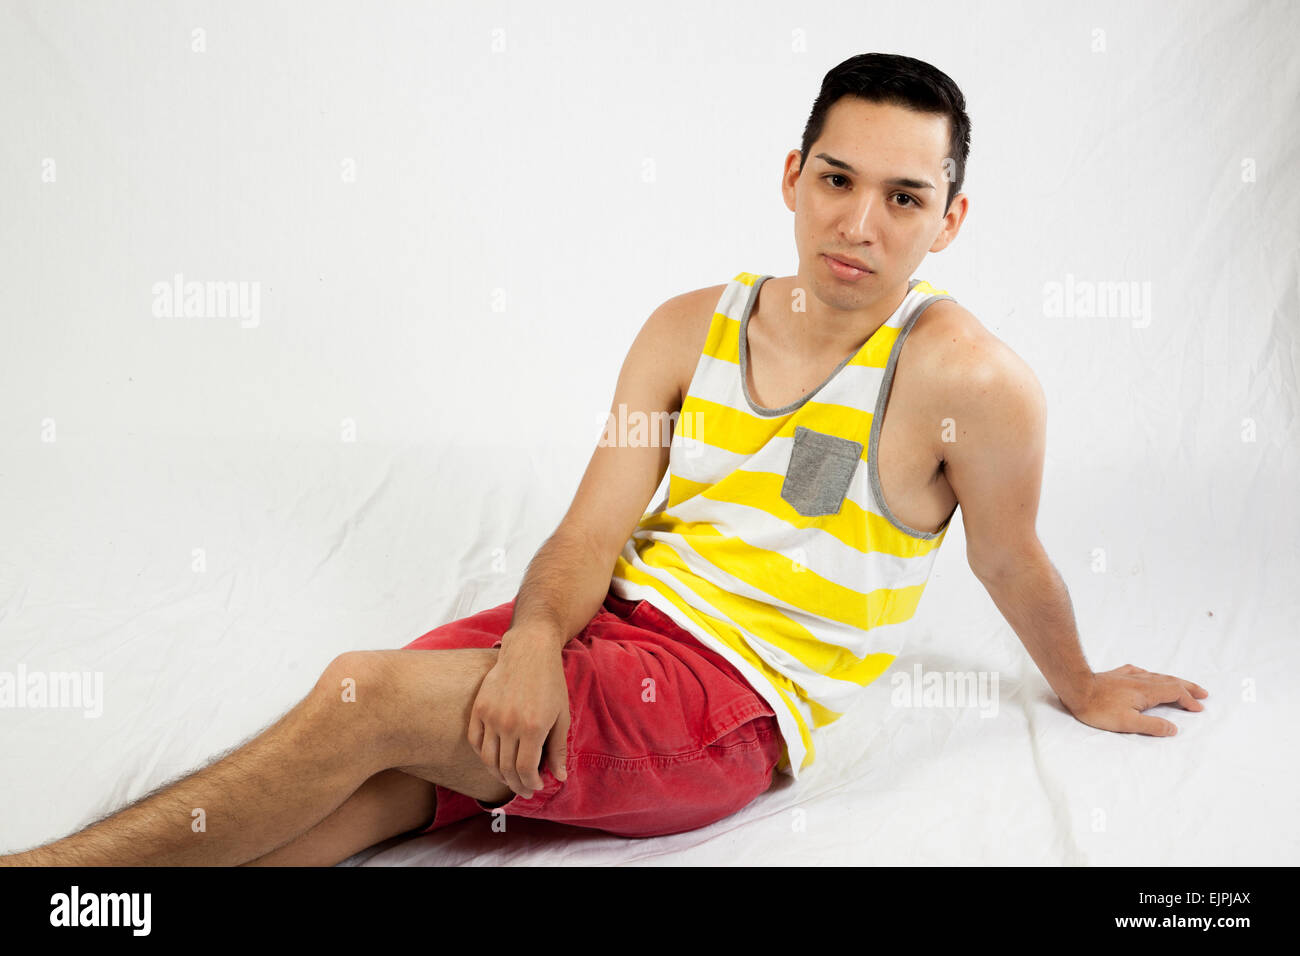 Young man sitting with a serious expression Stock Photo